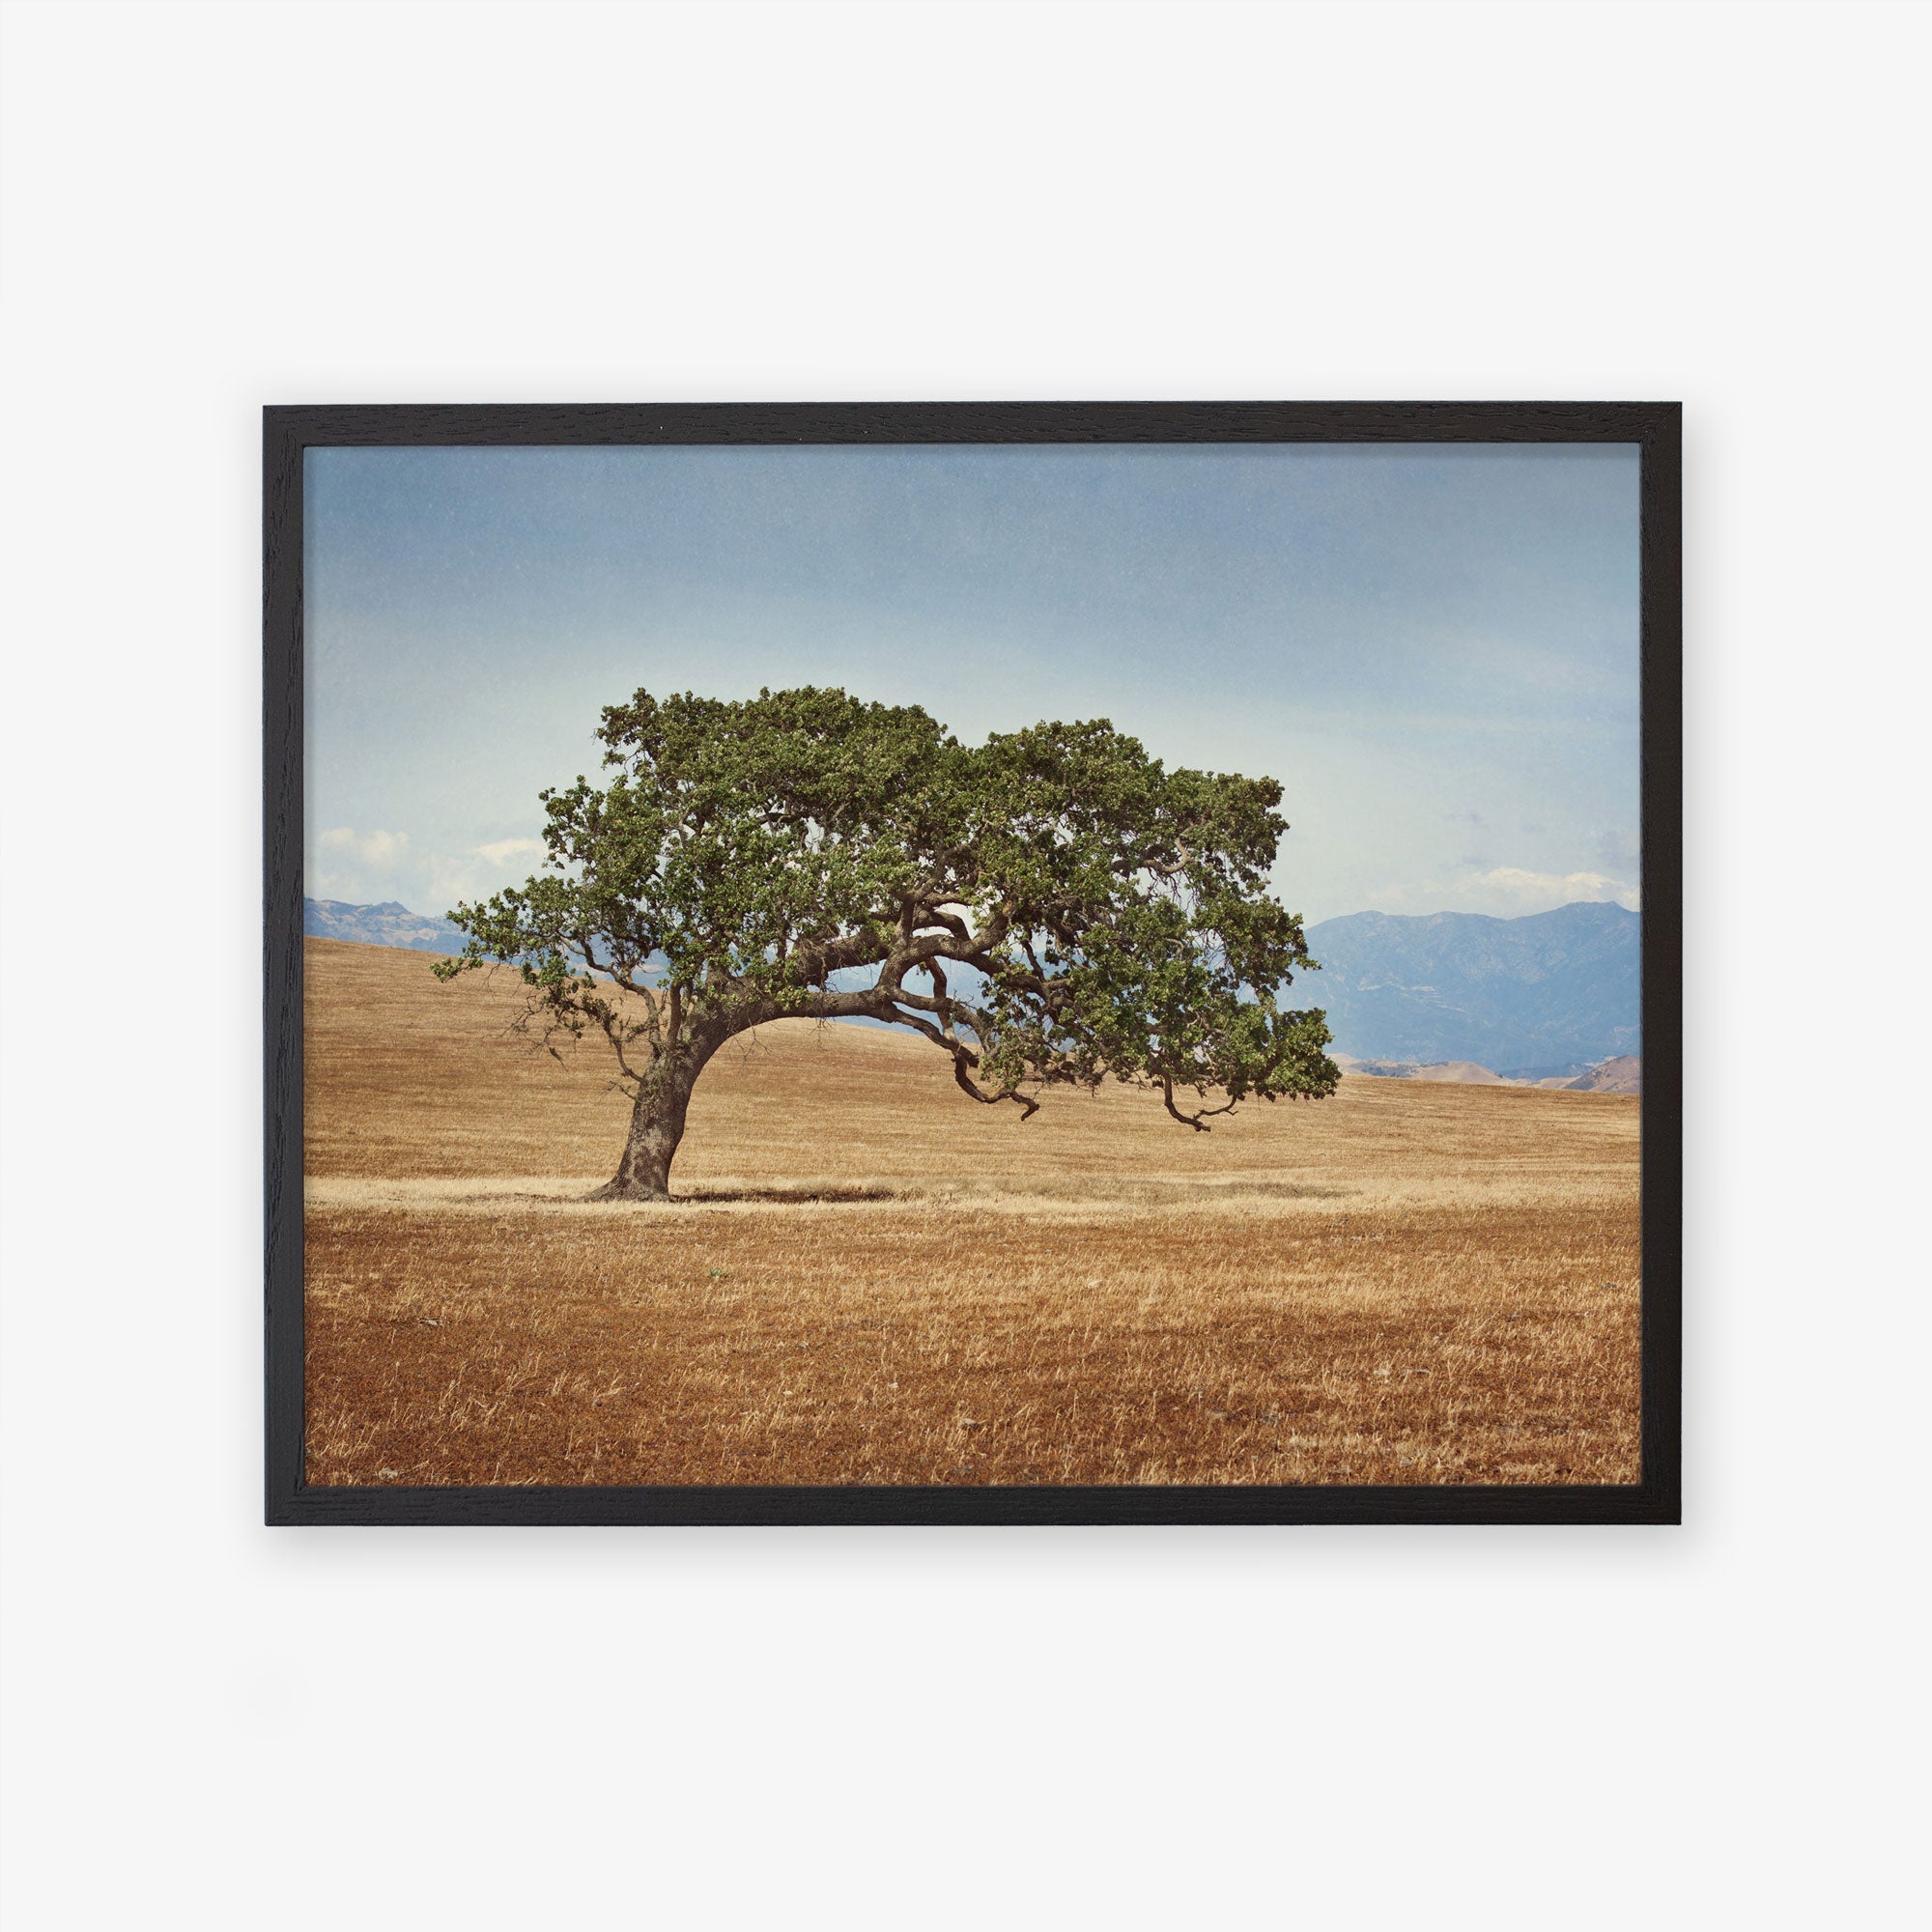 A framed photograph of a solitary California Oak Tree in a golden grassy field under a clear blue sky, with distant mountains partially obscured by haze in the background - Offley Green&#39;s &#39;Windswept&#39; Hawaii Palm Tree Print.